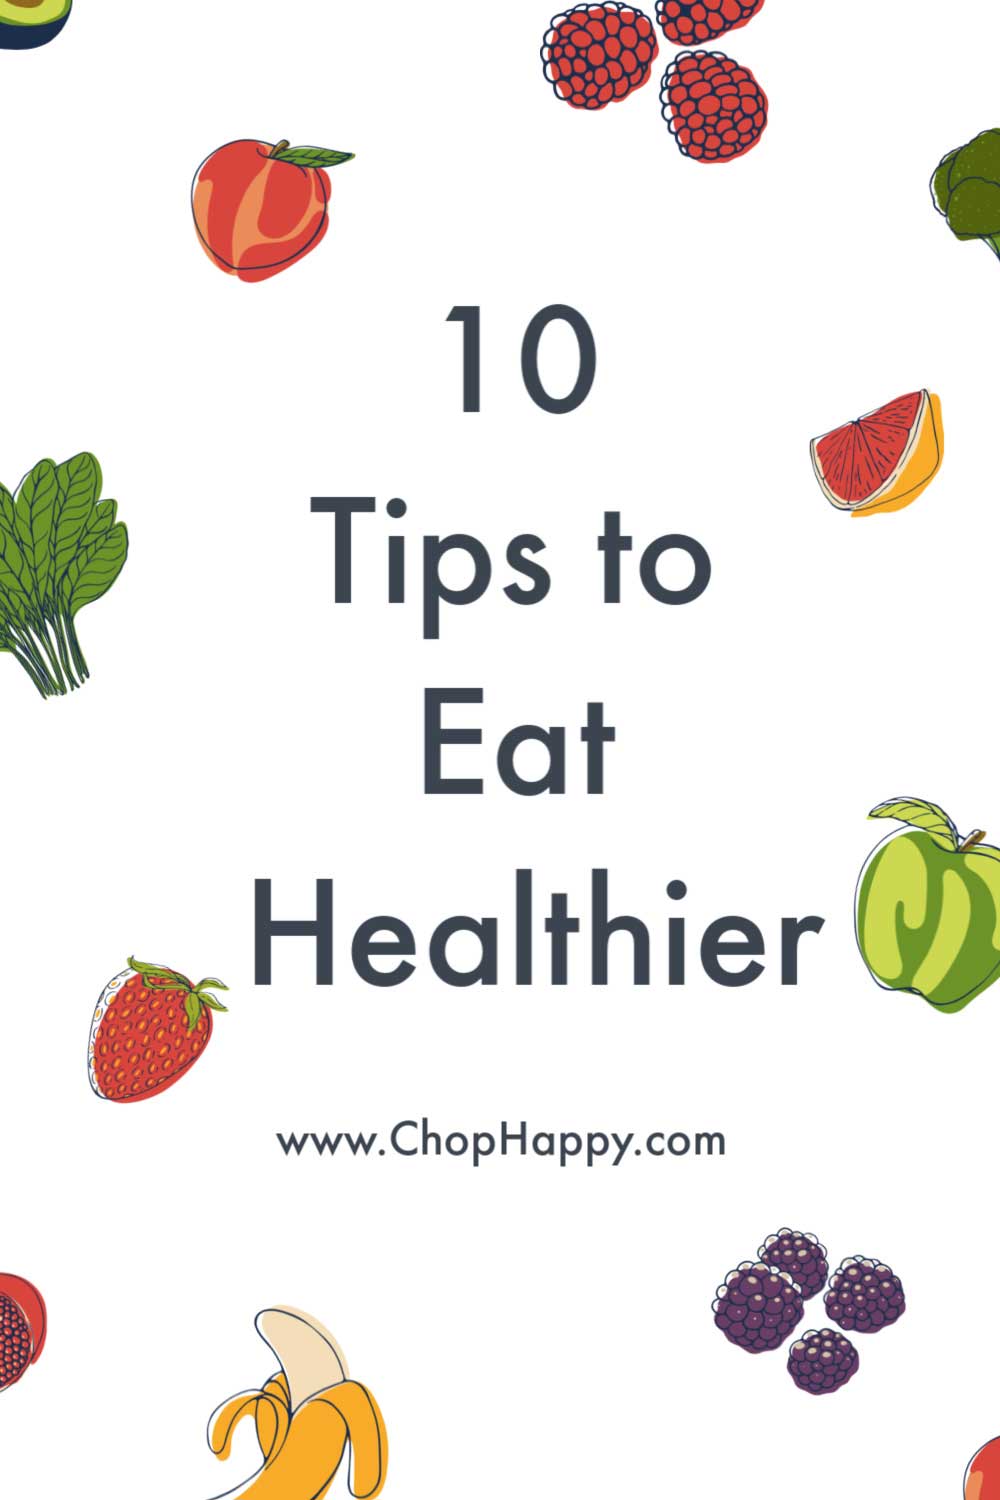 10 Tips To Eat Healthier and Be Healthier In The Kitchen